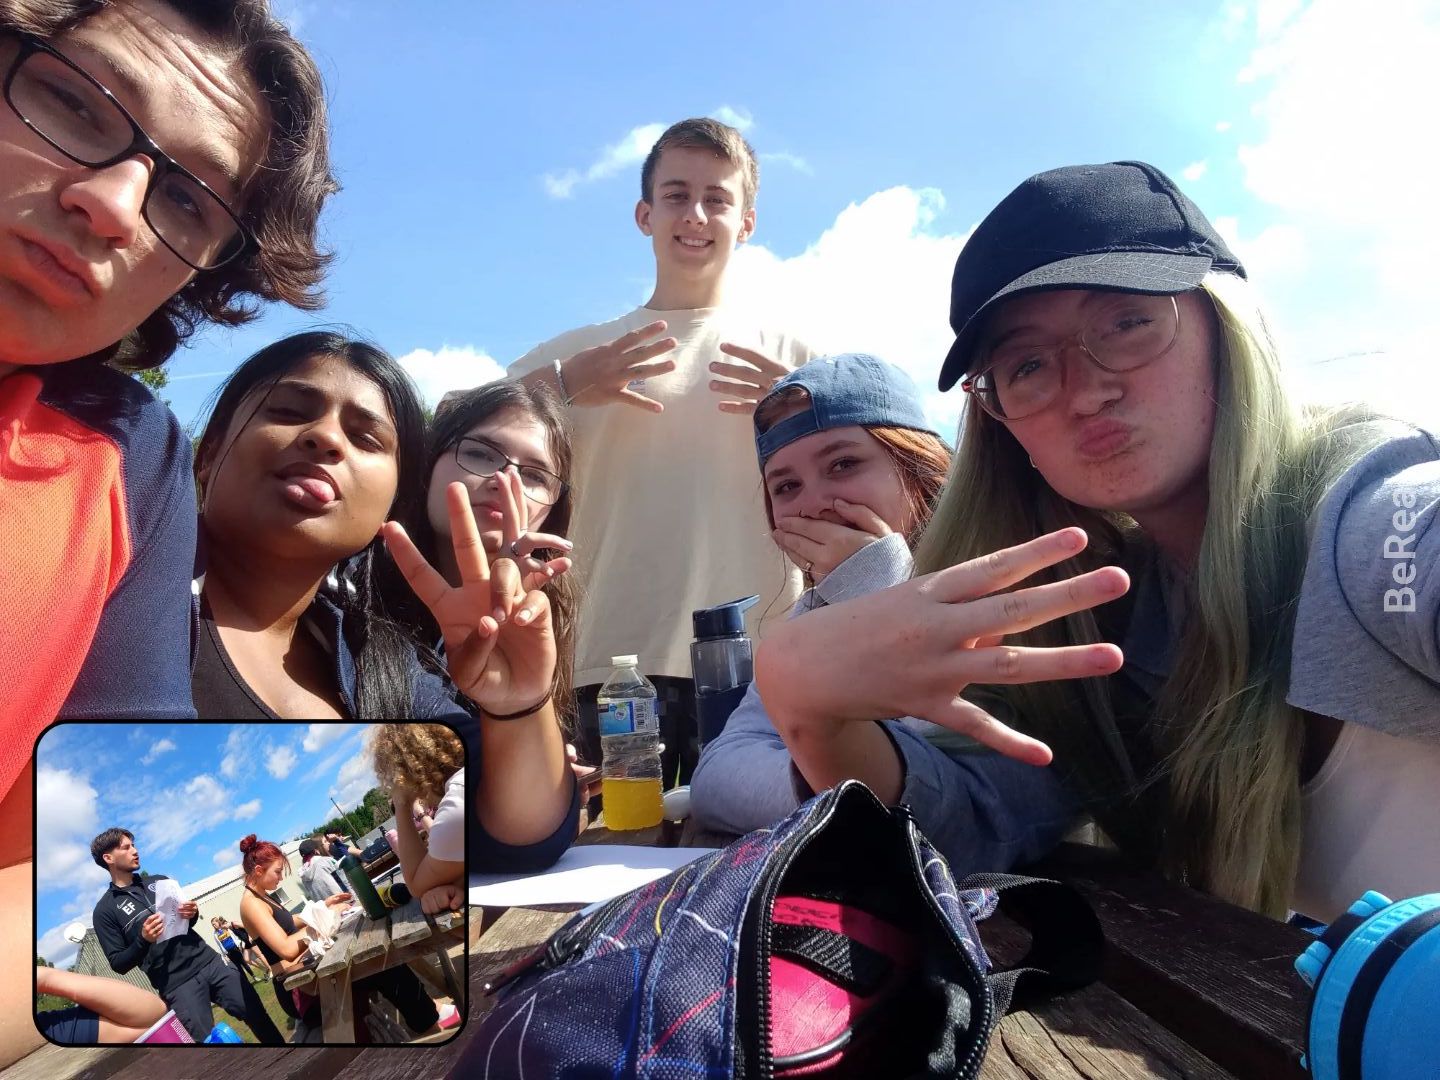 Charlotte is taking a selfie on the BeReal app. She's at the front wearing a cap and holding four fingers up to the camera, and her friends next to her are also doing peace signs with their hands. 